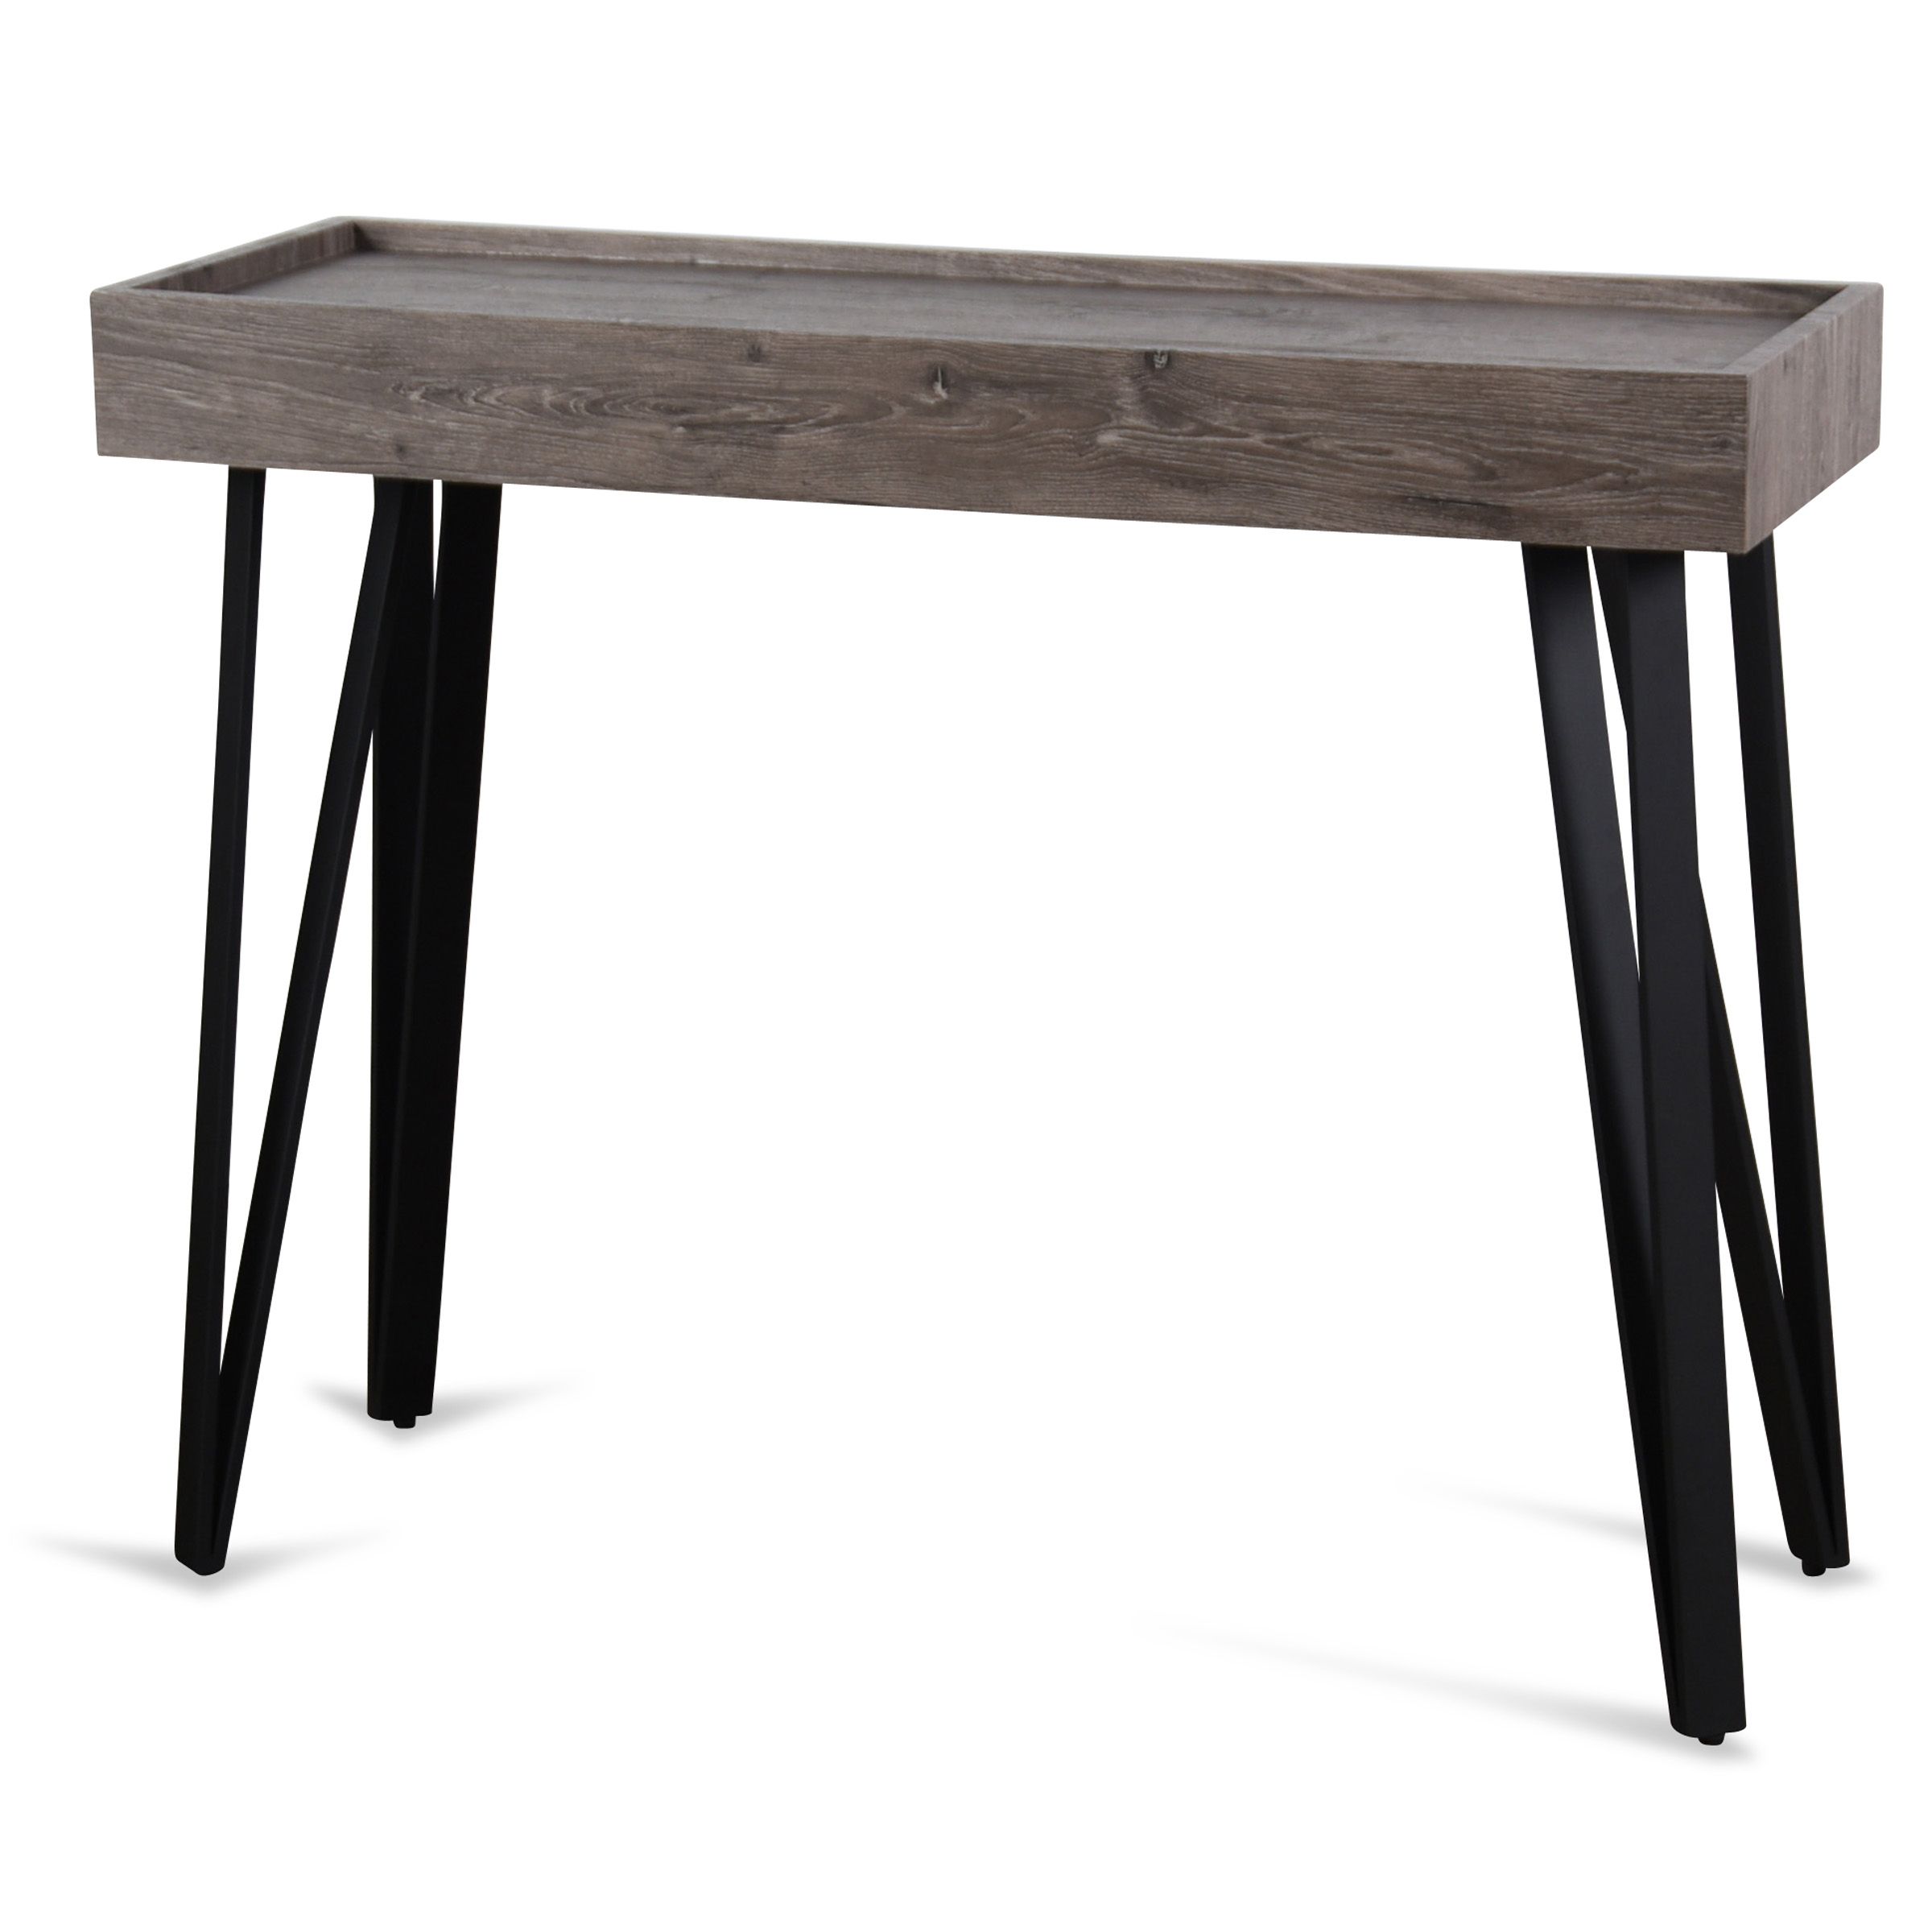 Natural Dark Sonoma Rectangular Wood Console Table With Metal Hairpin Pertaining To Oak Wood And Metal Legs Console Tables (View 8 of 20)